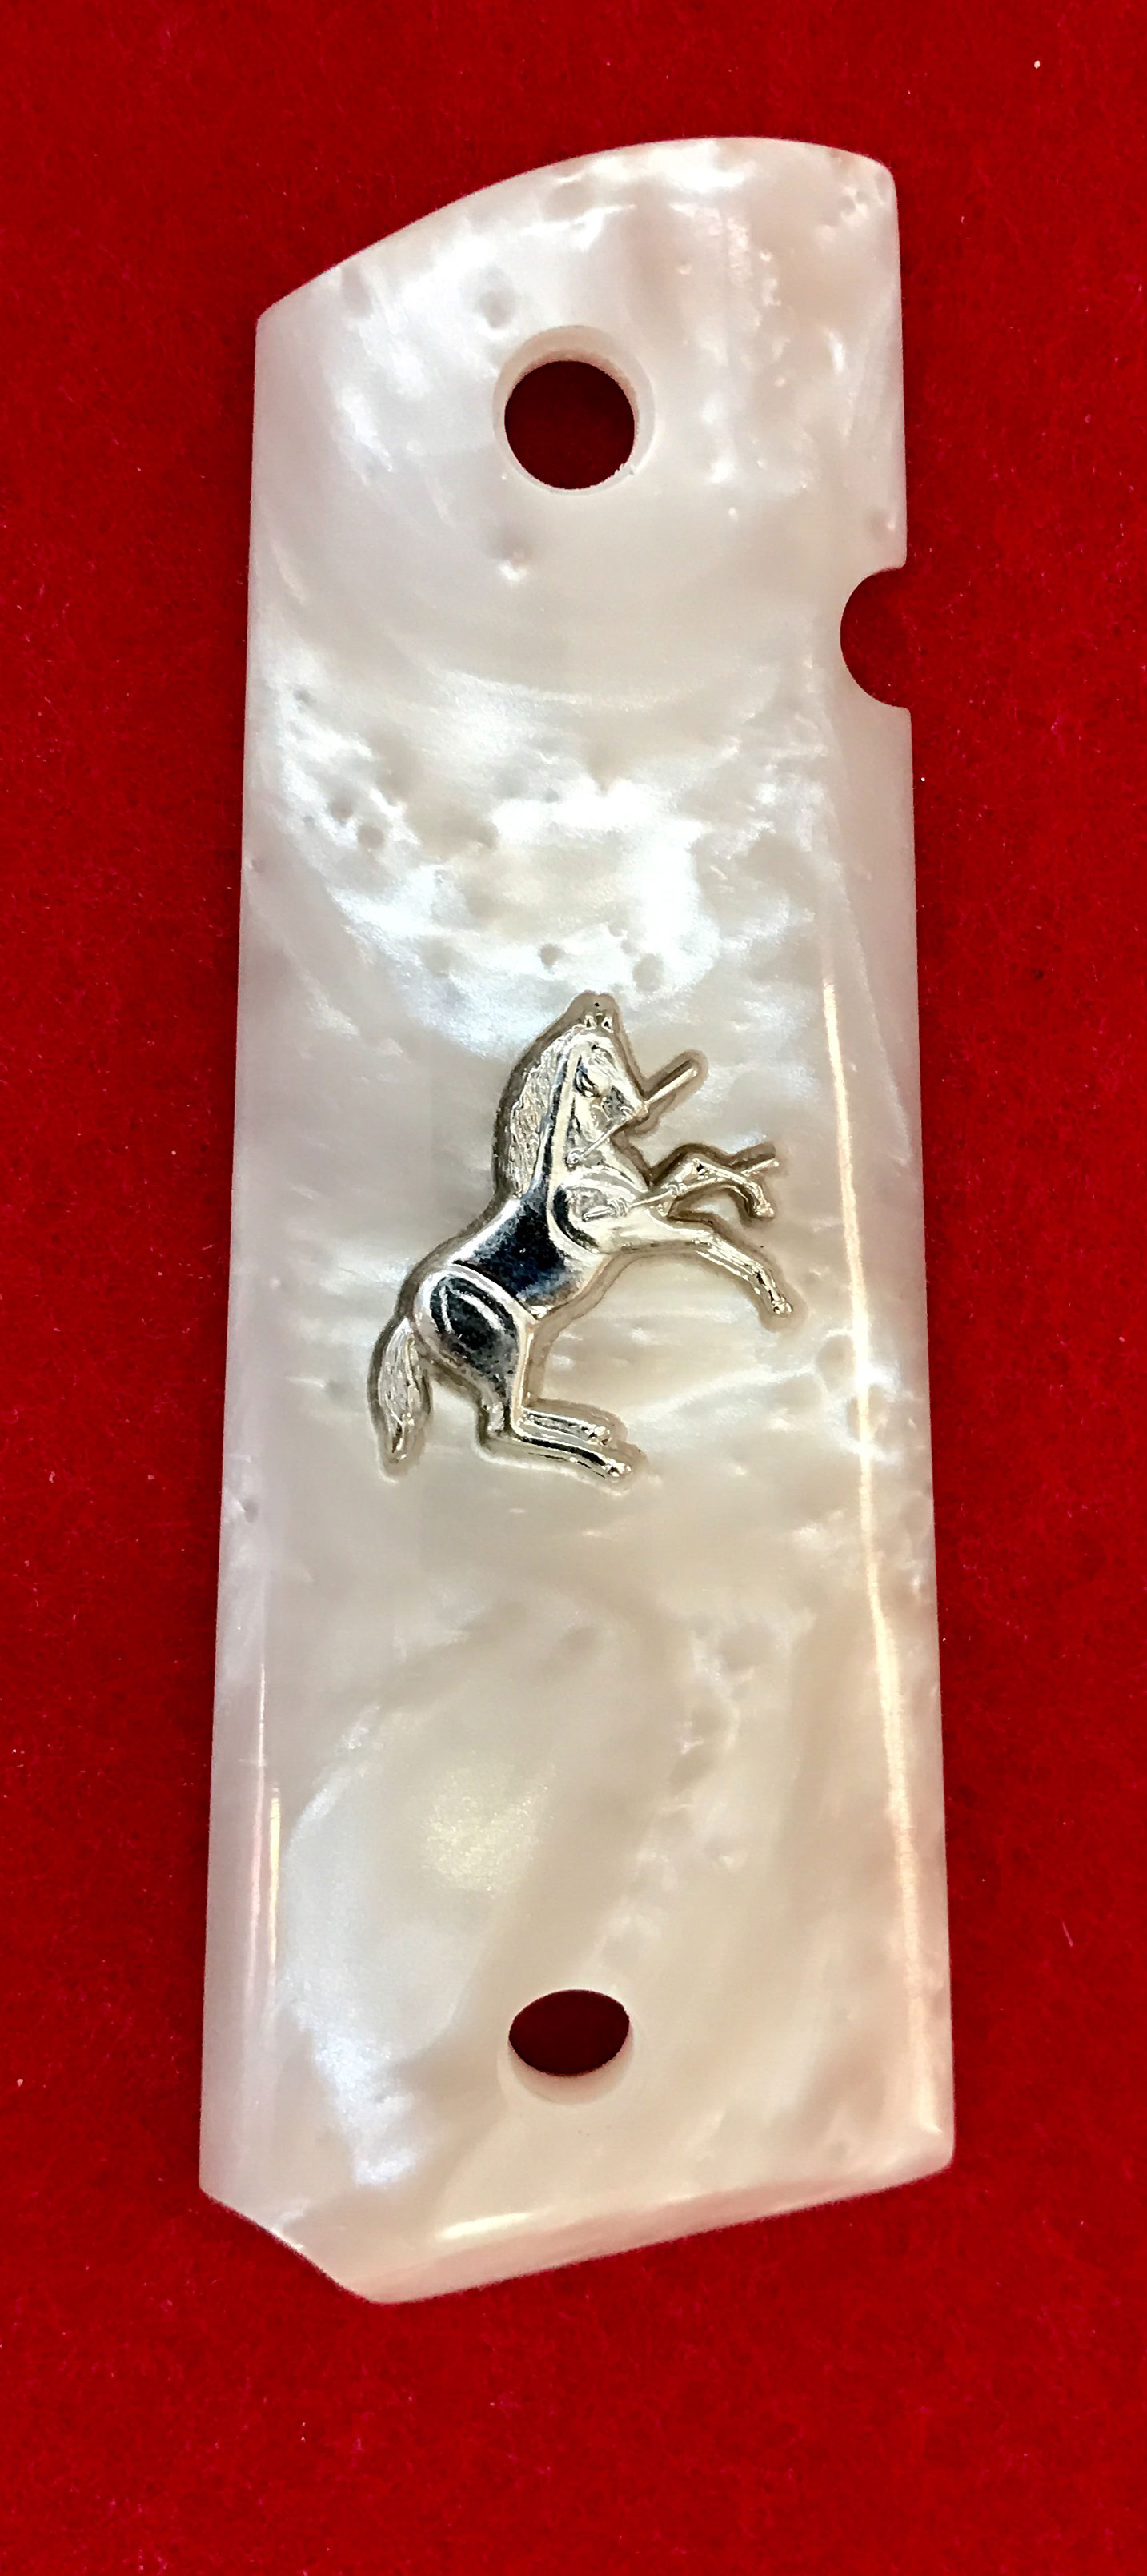 MADE IN U.S.A SILVER  RAMPANT HORSE  MEDALLIONS FREE STANDARD SHIPPING. GRIP KING 1911 GRIPS,FITS COLT FULL SIZE GOVERNMENT & COMMANDER,SALE $45.73 FABULOUS SAMBAR STAG FAUX WOW REALISTIC LOOK 